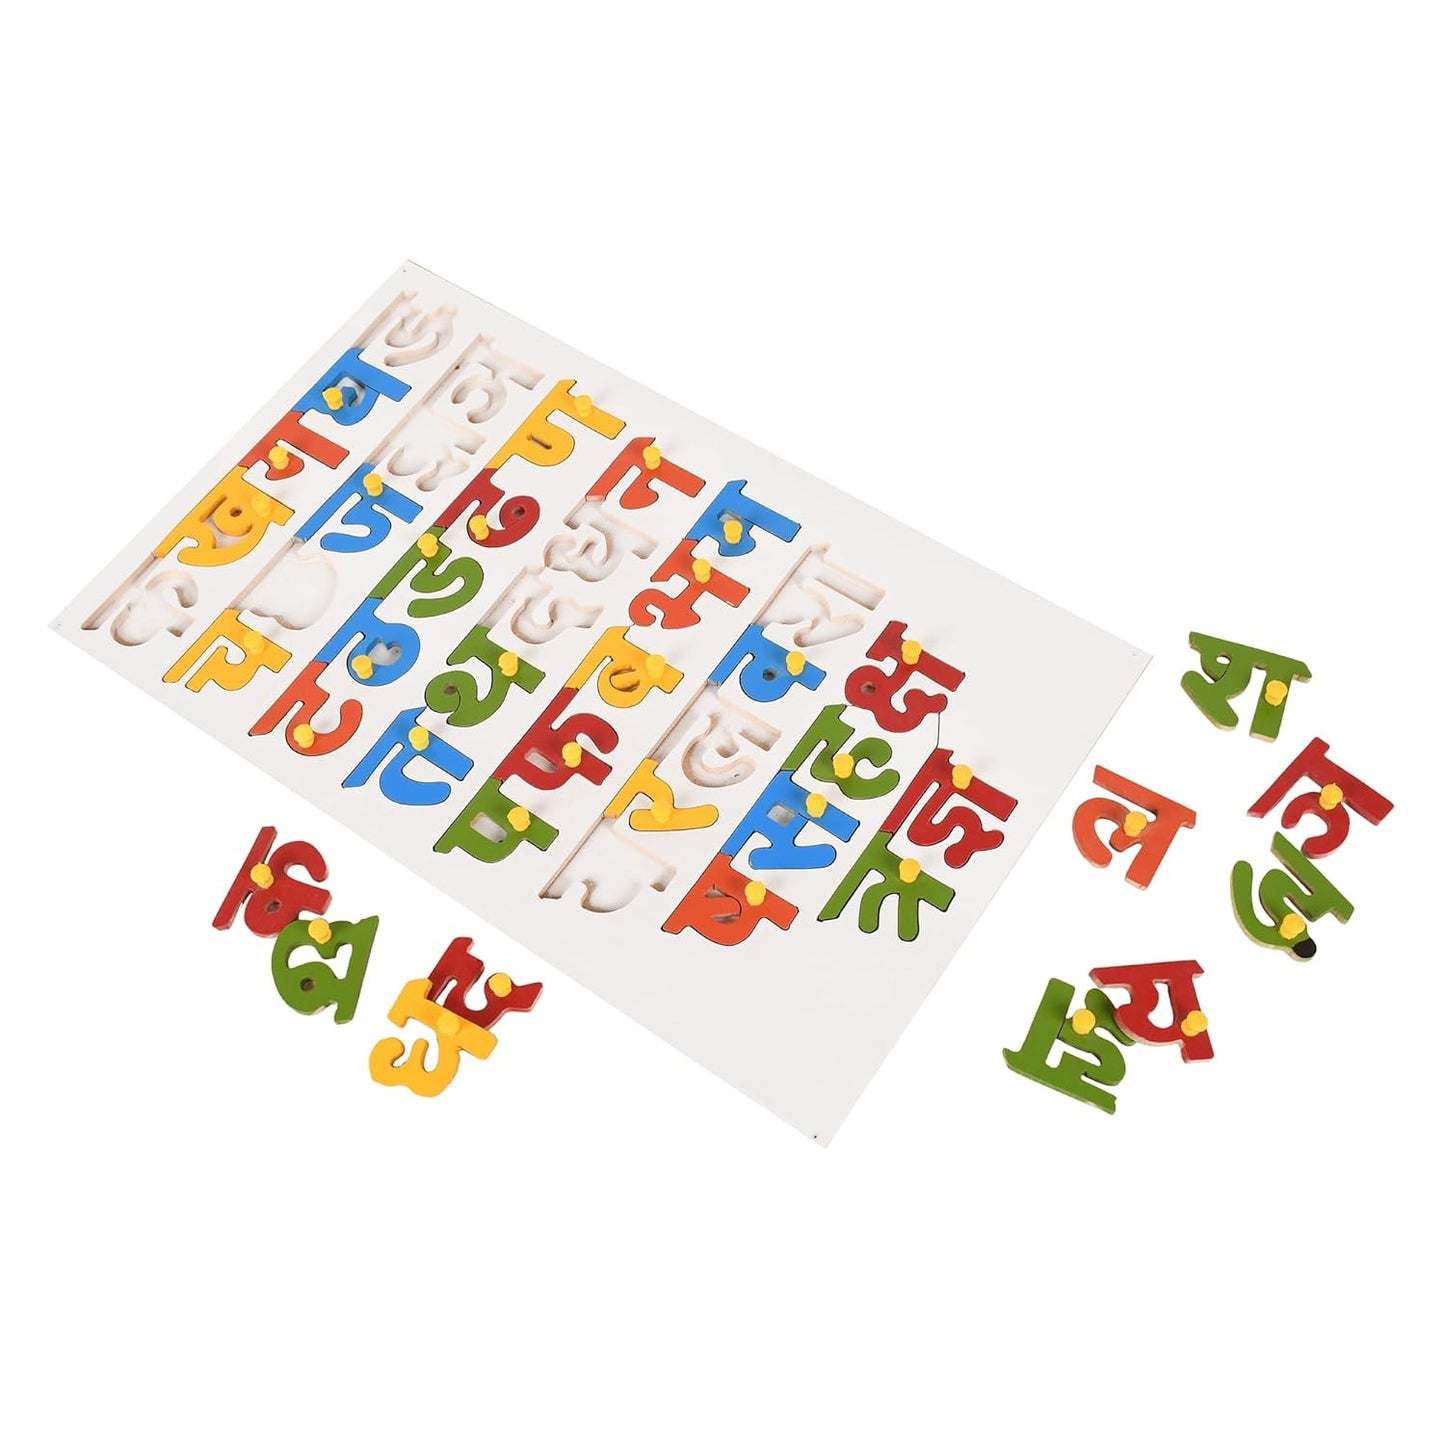 Art & Craft ® Wooden Hindi Letter Puzzle with Knobs Educational and Learning Toy for Kids | Learning Hindi Latter pegged Puzzles for Toddler Ages 2+ - (10 X 16 Inch)